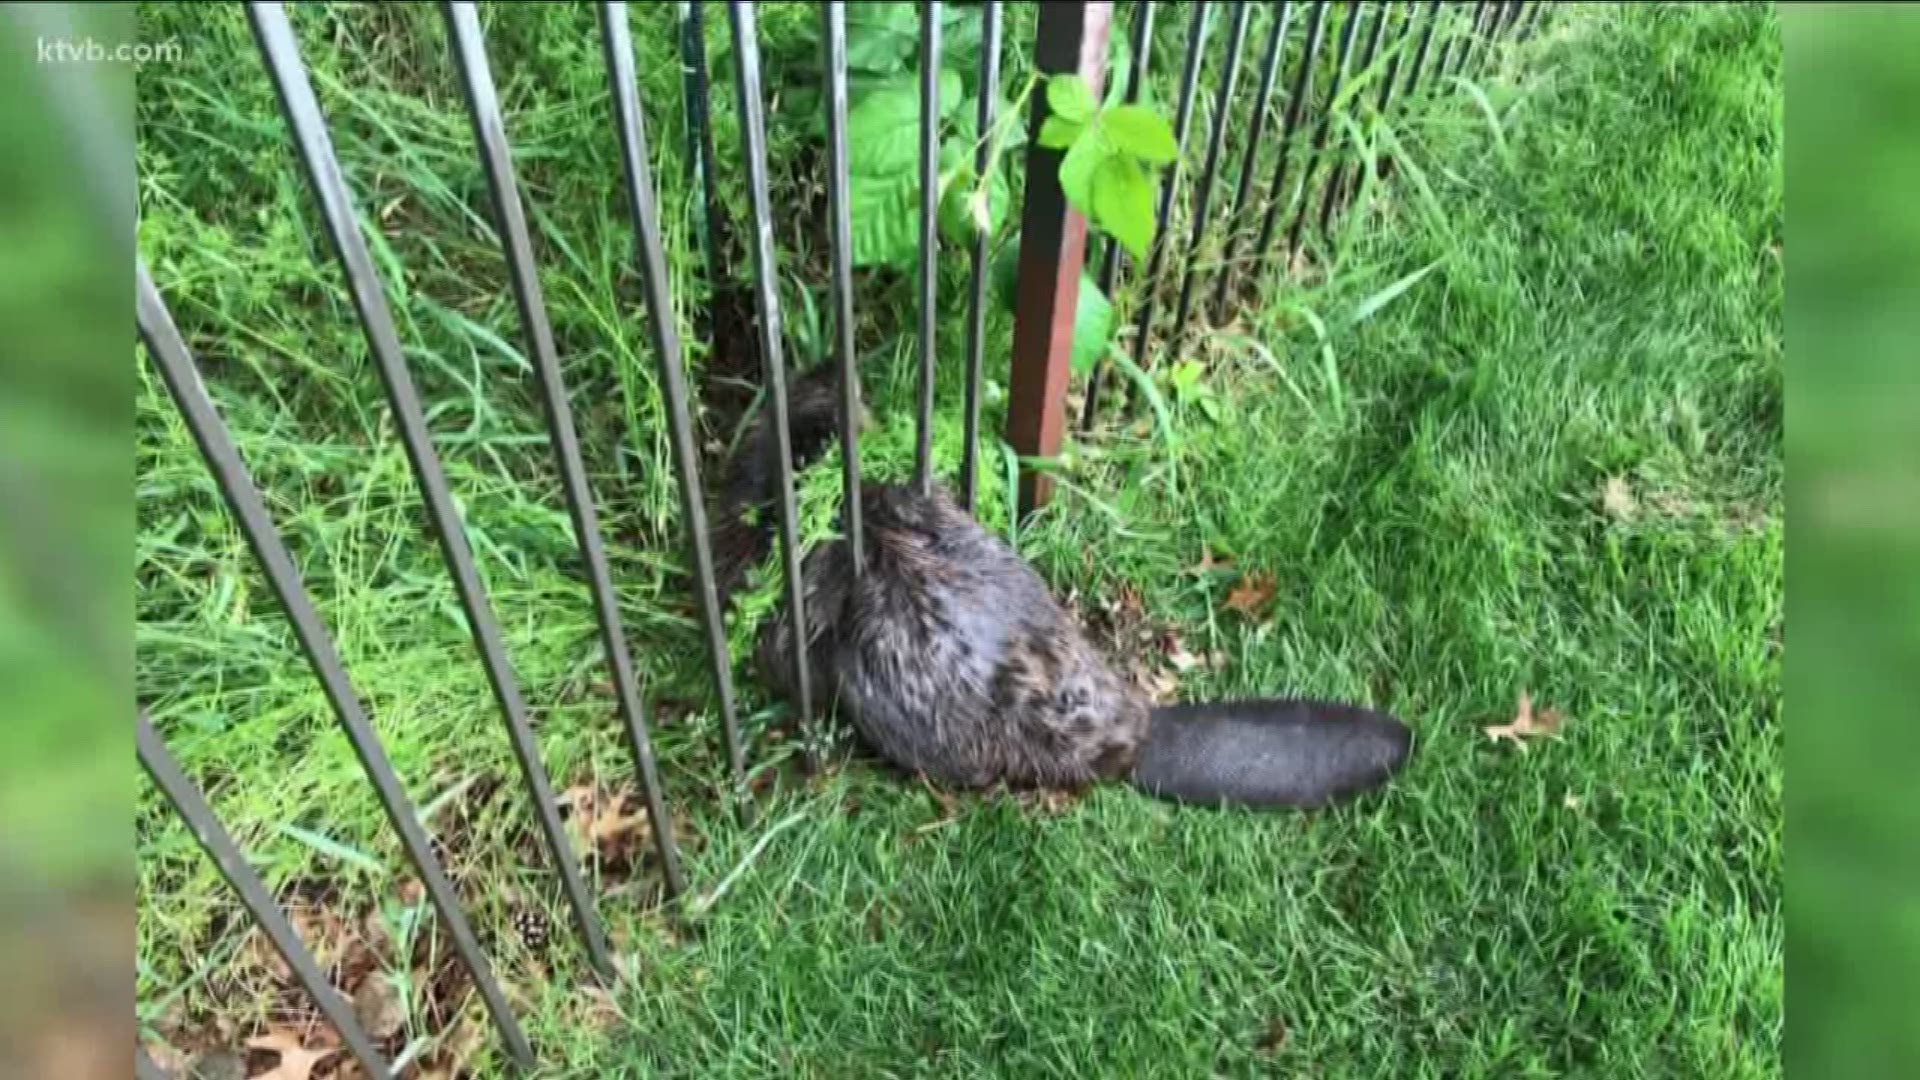 The beaver was stuck between the bars of a metal fence-- so firefighters bent the bars until they were wide enough for the beaver to wiggle out. 